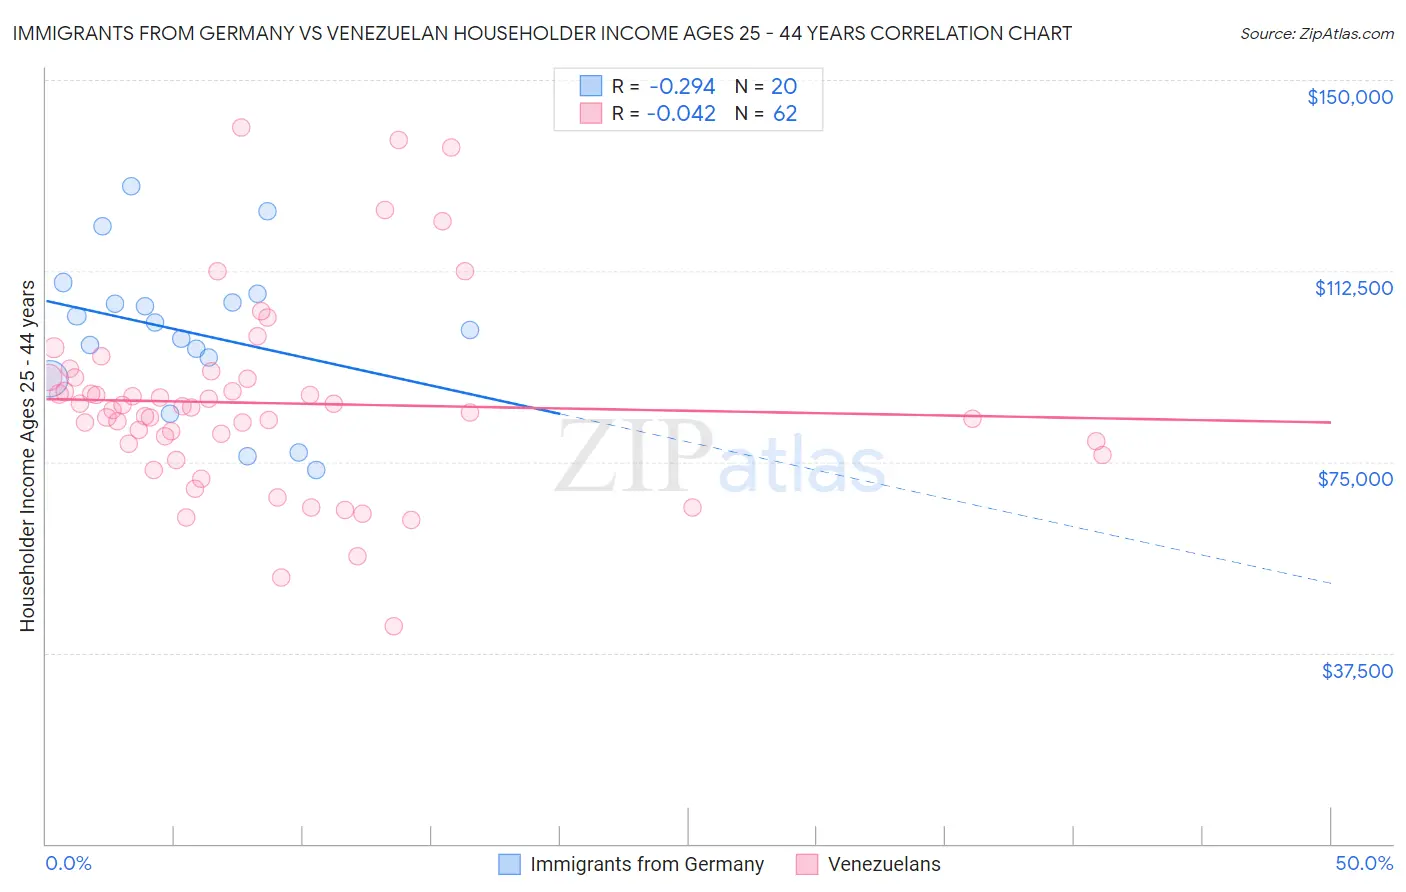 Immigrants from Germany vs Venezuelan Householder Income Ages 25 - 44 years